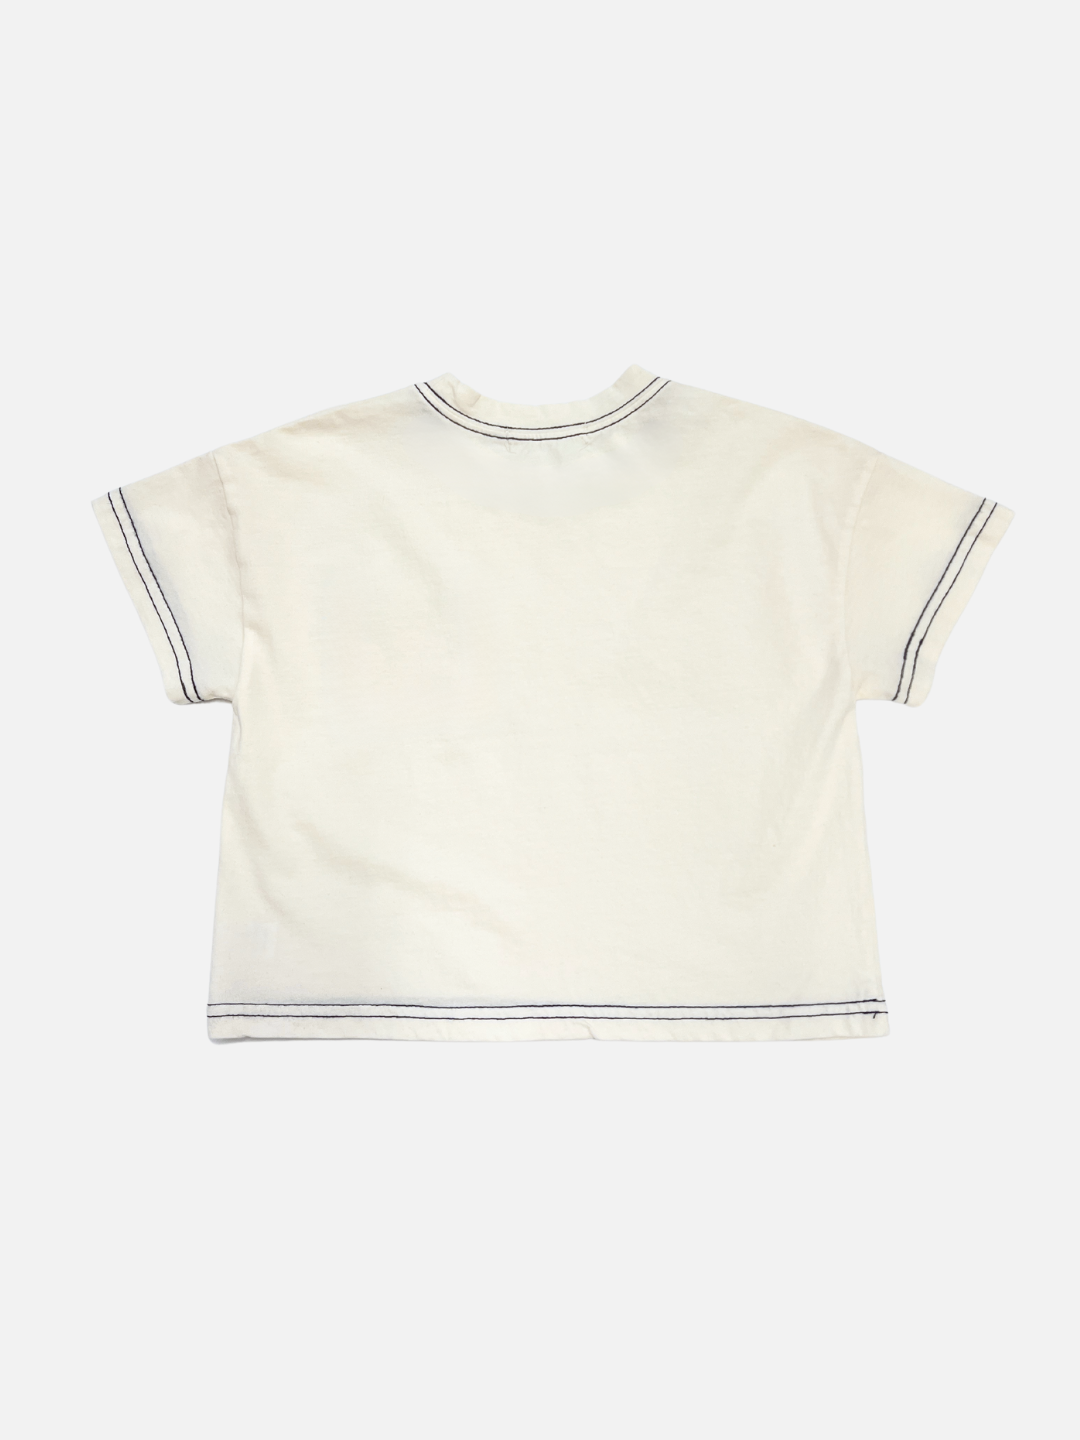 Back view of the kids' stitch pocket tee in Ivory feturing contrast black stitch